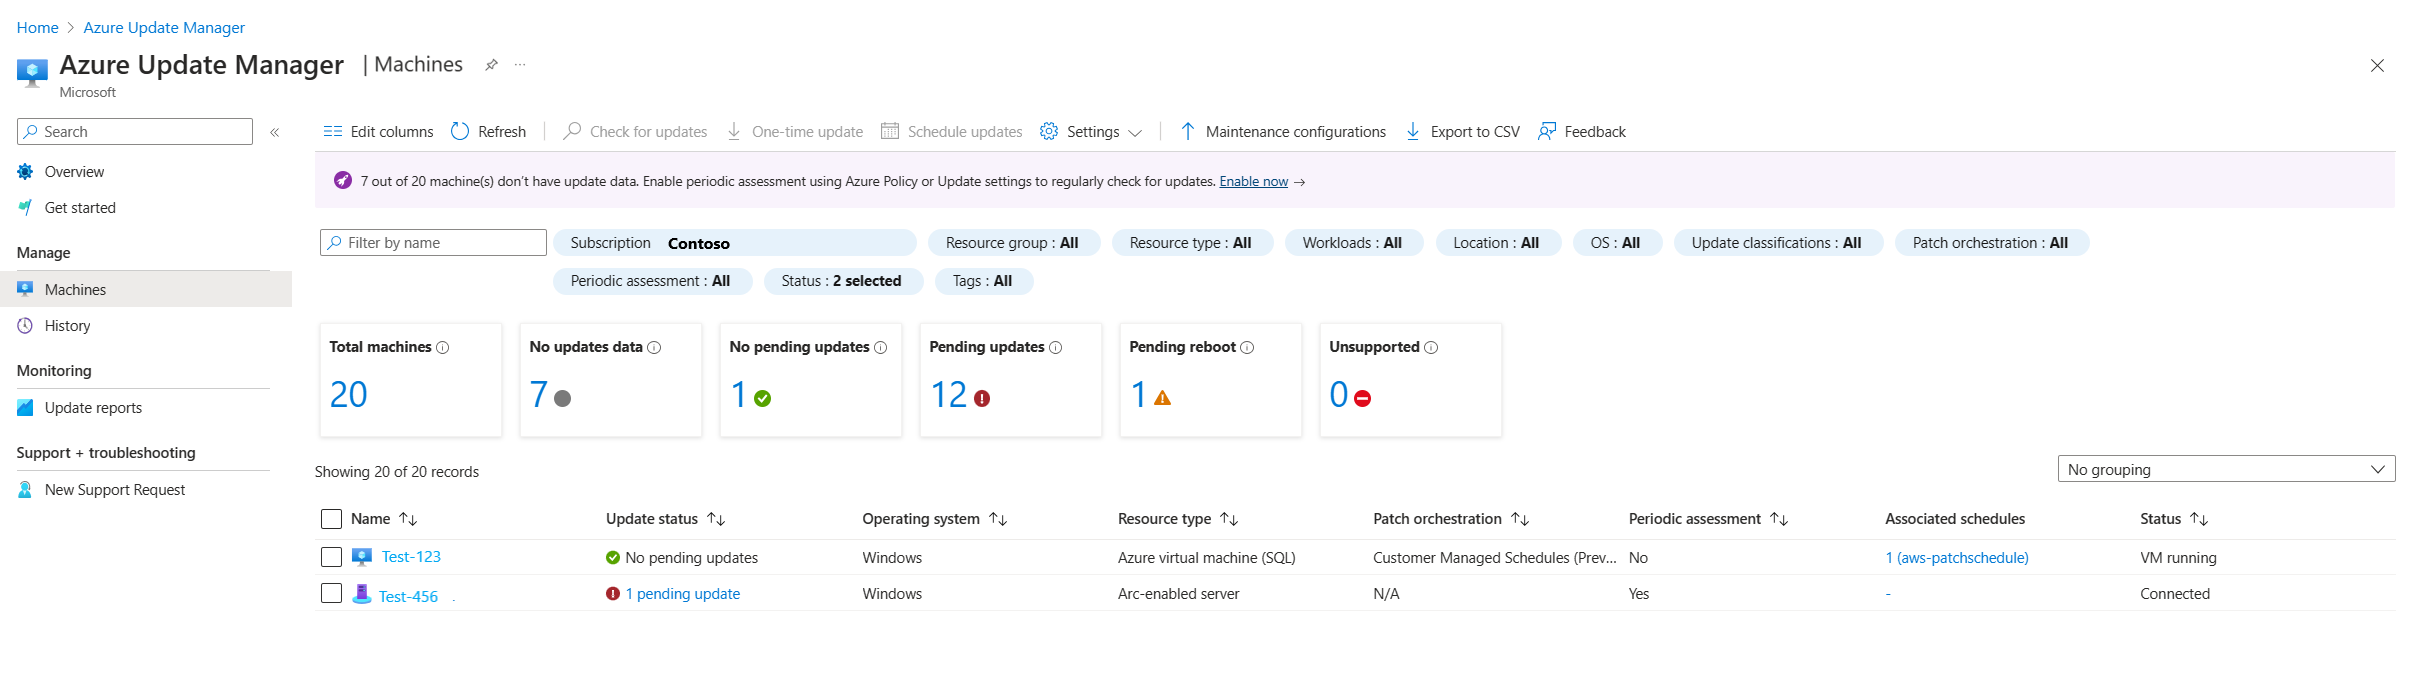 Screenshot of update management center(preview) Machines page in the Azure portal.